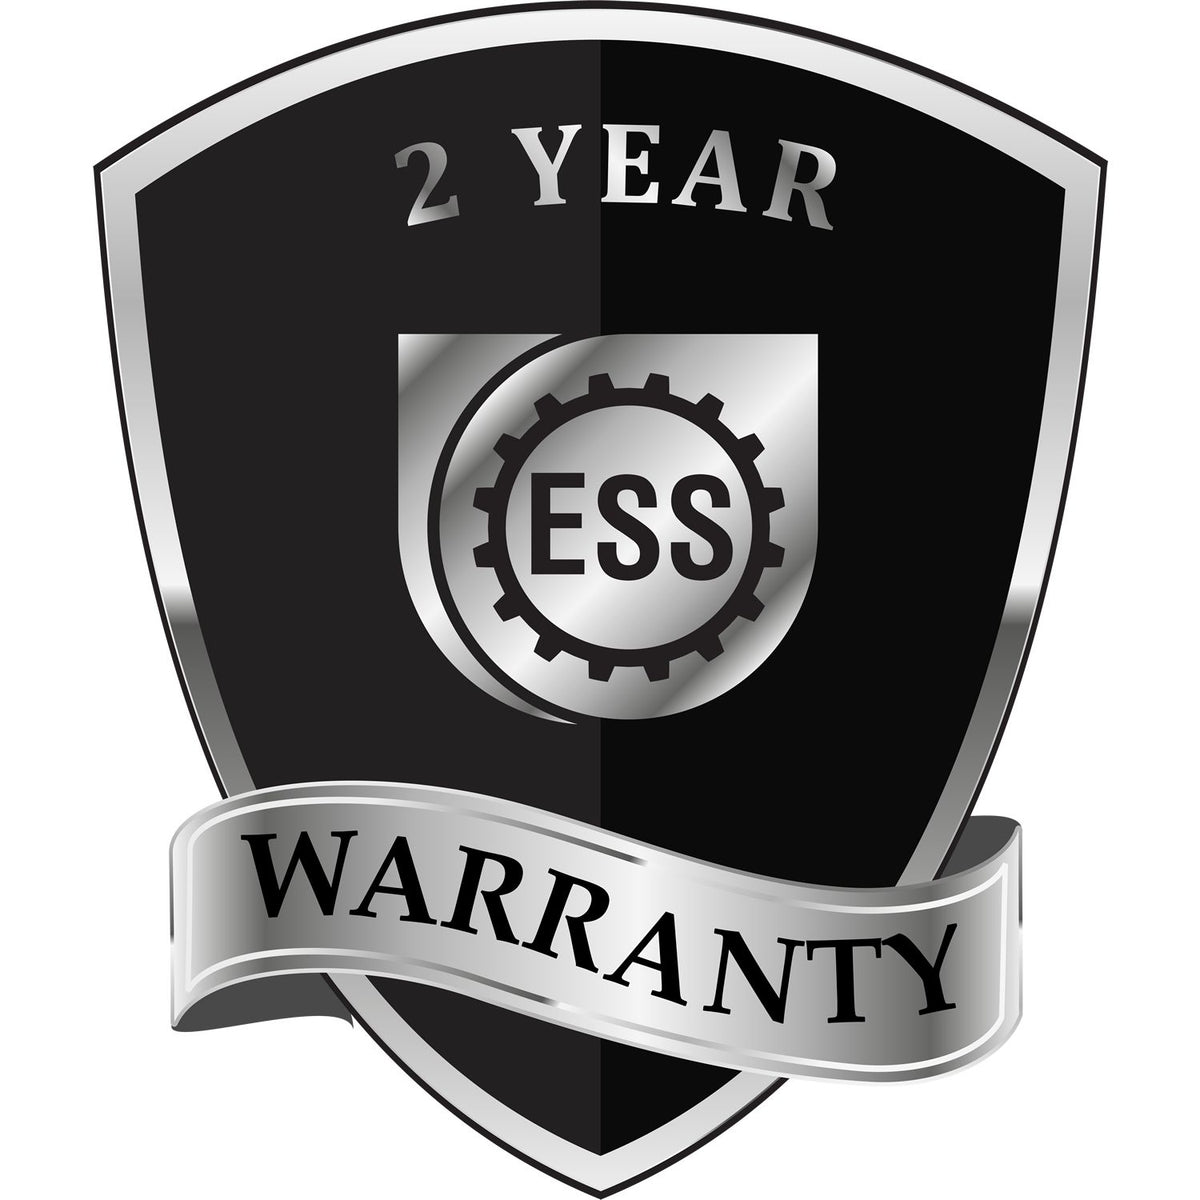 A black and silver badge or emblem showing warranty information for the Hybrid New Hampshire Landscape Architect Seal